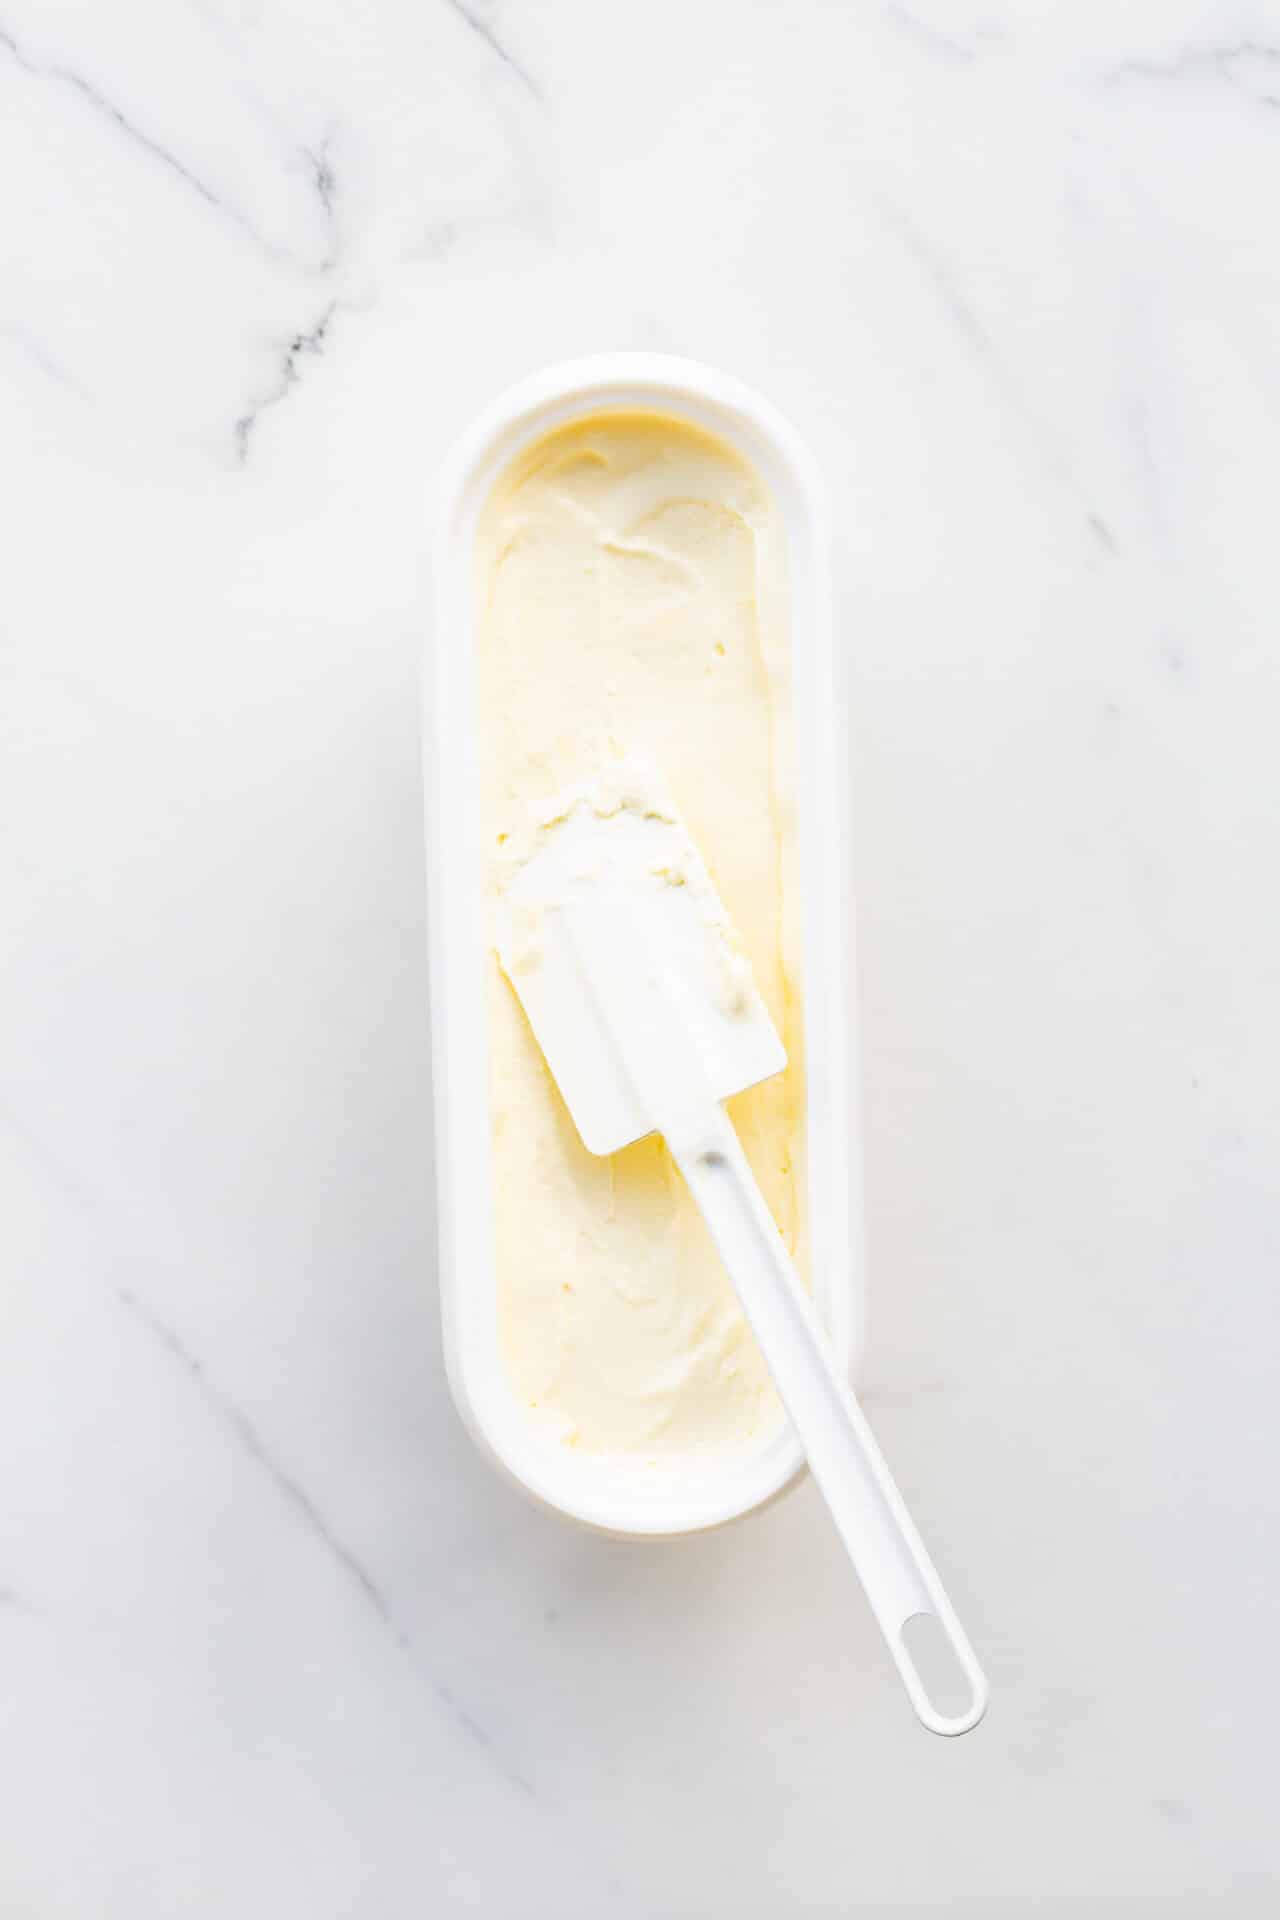 Freshly churned lemon ice cream transfered to a container with a white spatula before freezing